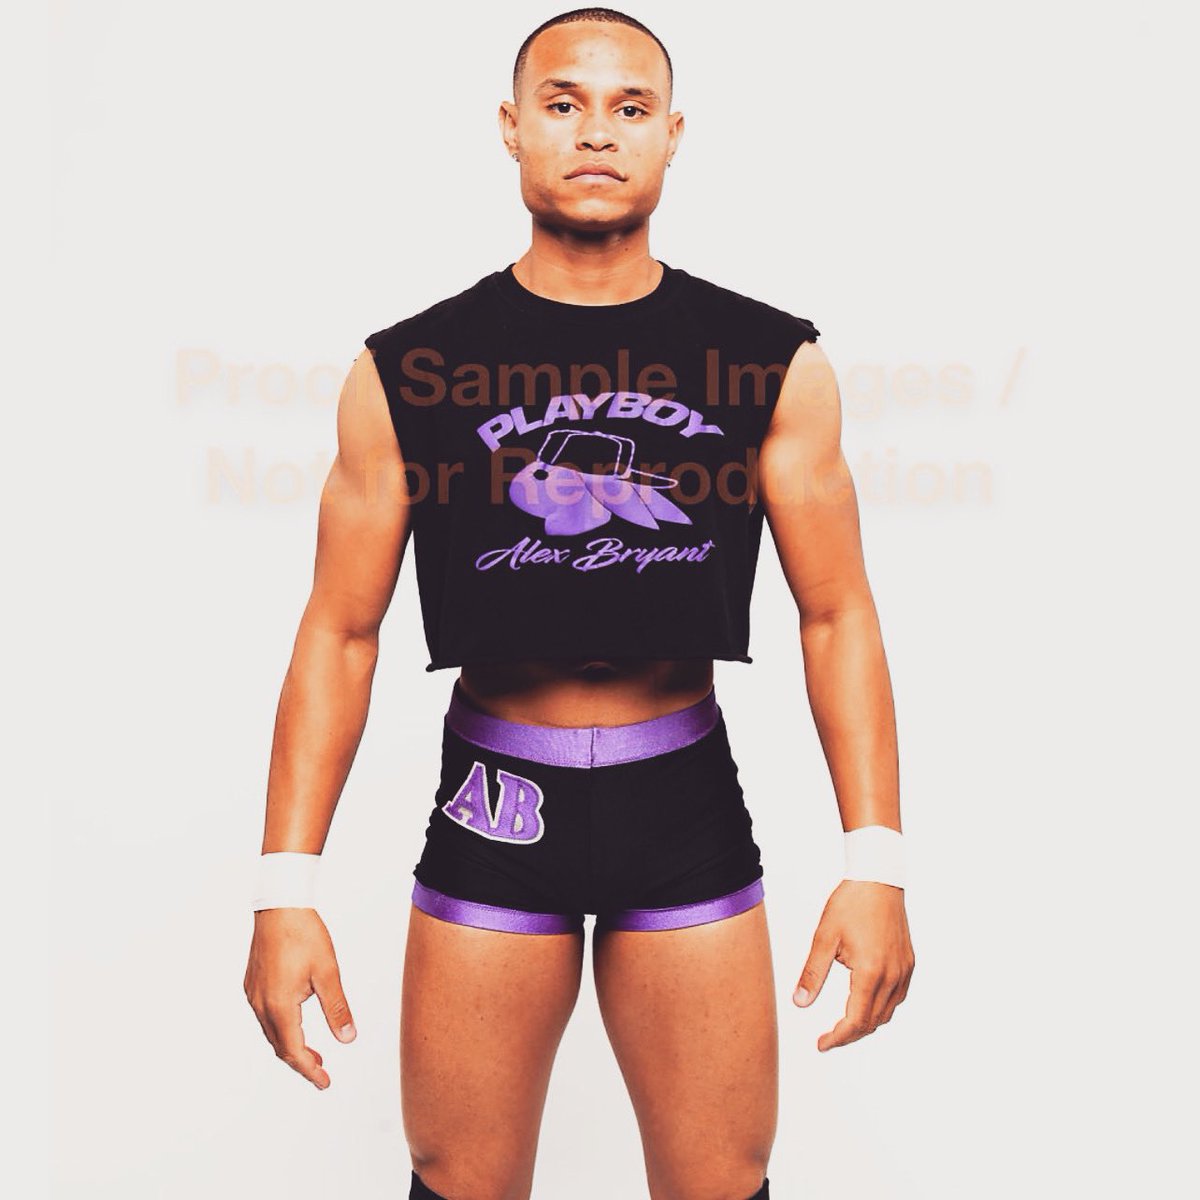 On the rise to be a franchise player 
👊🏽💪🏽😈

#ImpactPlayer #MoodShifter #TrendingTopic #ProWrestling #ProWrestler #CYNProject #ControlYourNarrative #PlayboyAlexBryant